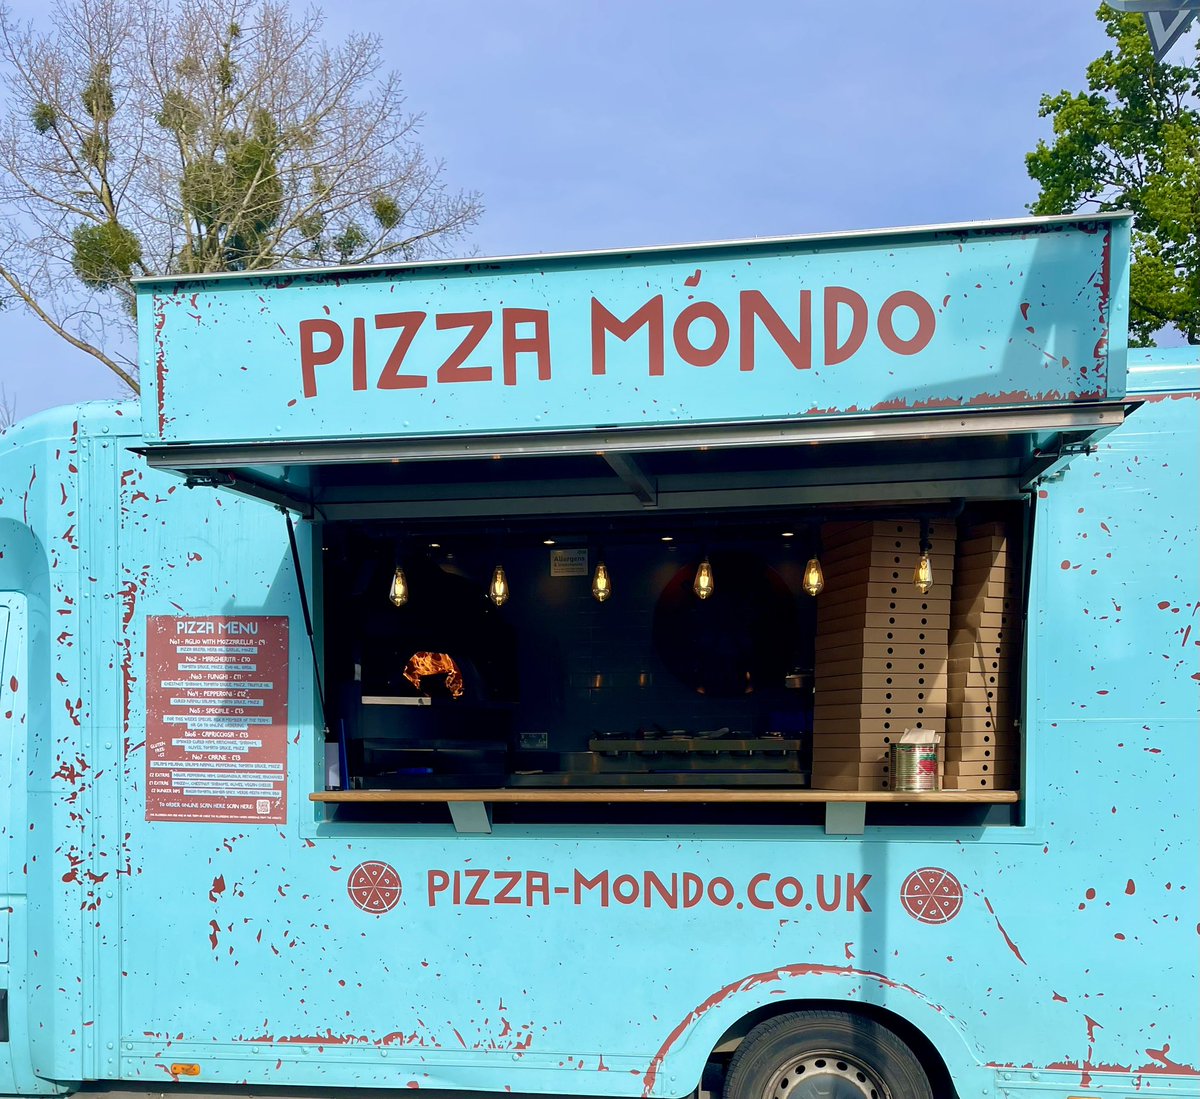 Pizza Wednesday @foodpark_Cam West 12-2 Dykes End Pub 5-8 order.pizza-mondo.co.uk